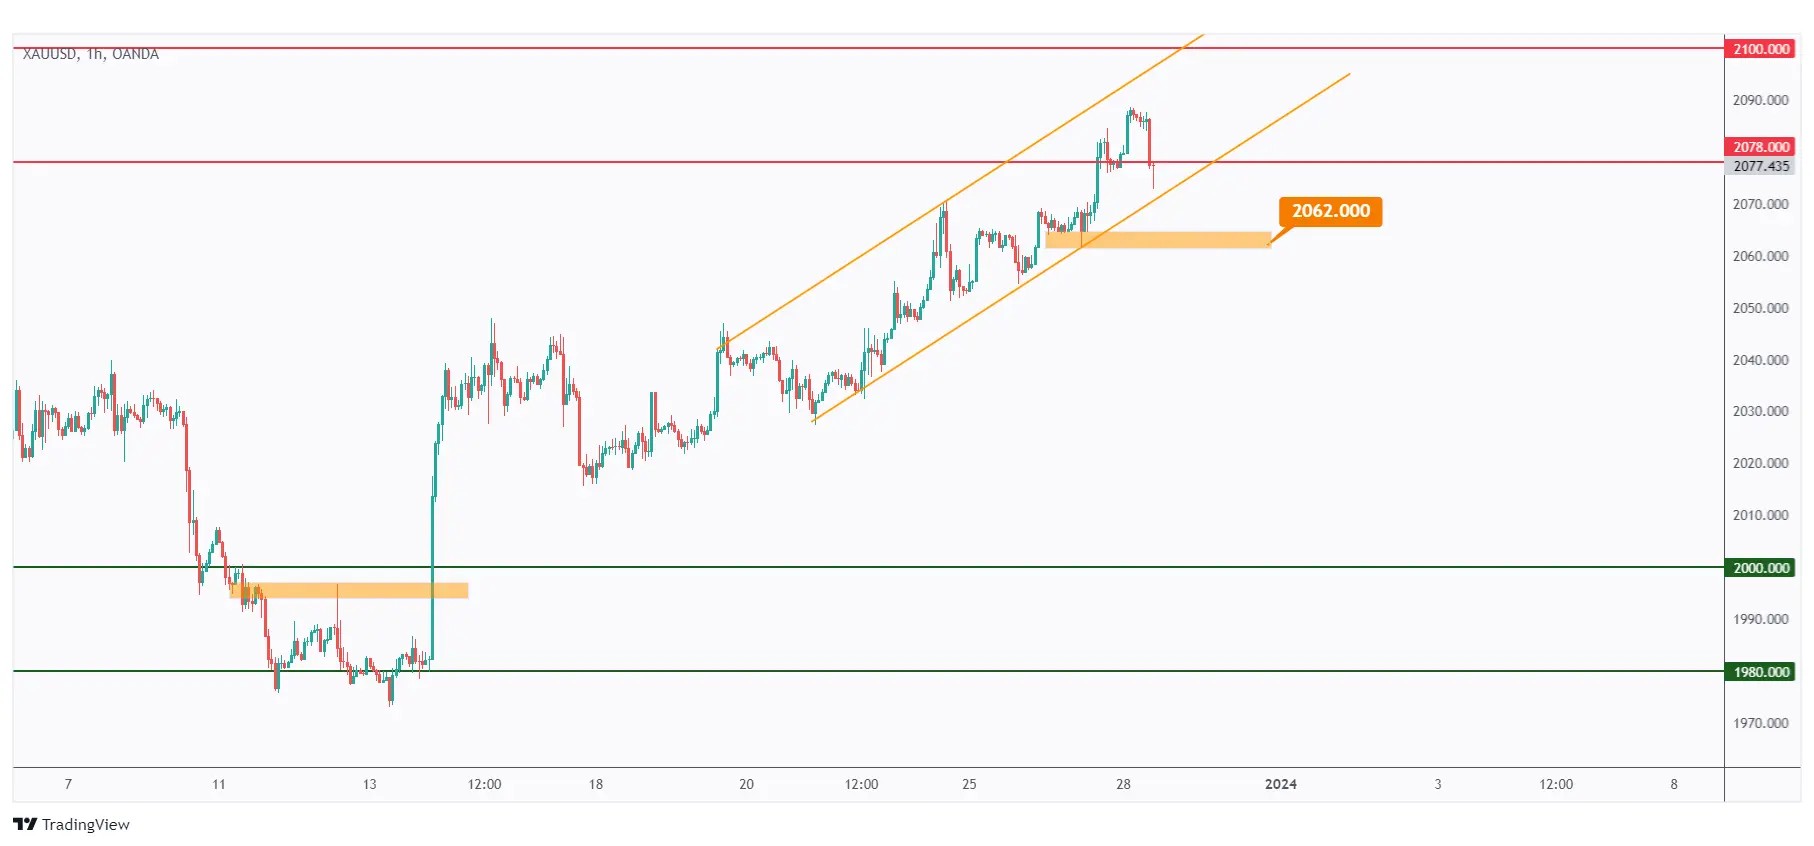 Gold 1H chart showing the bullish trend trading inside a rising channel